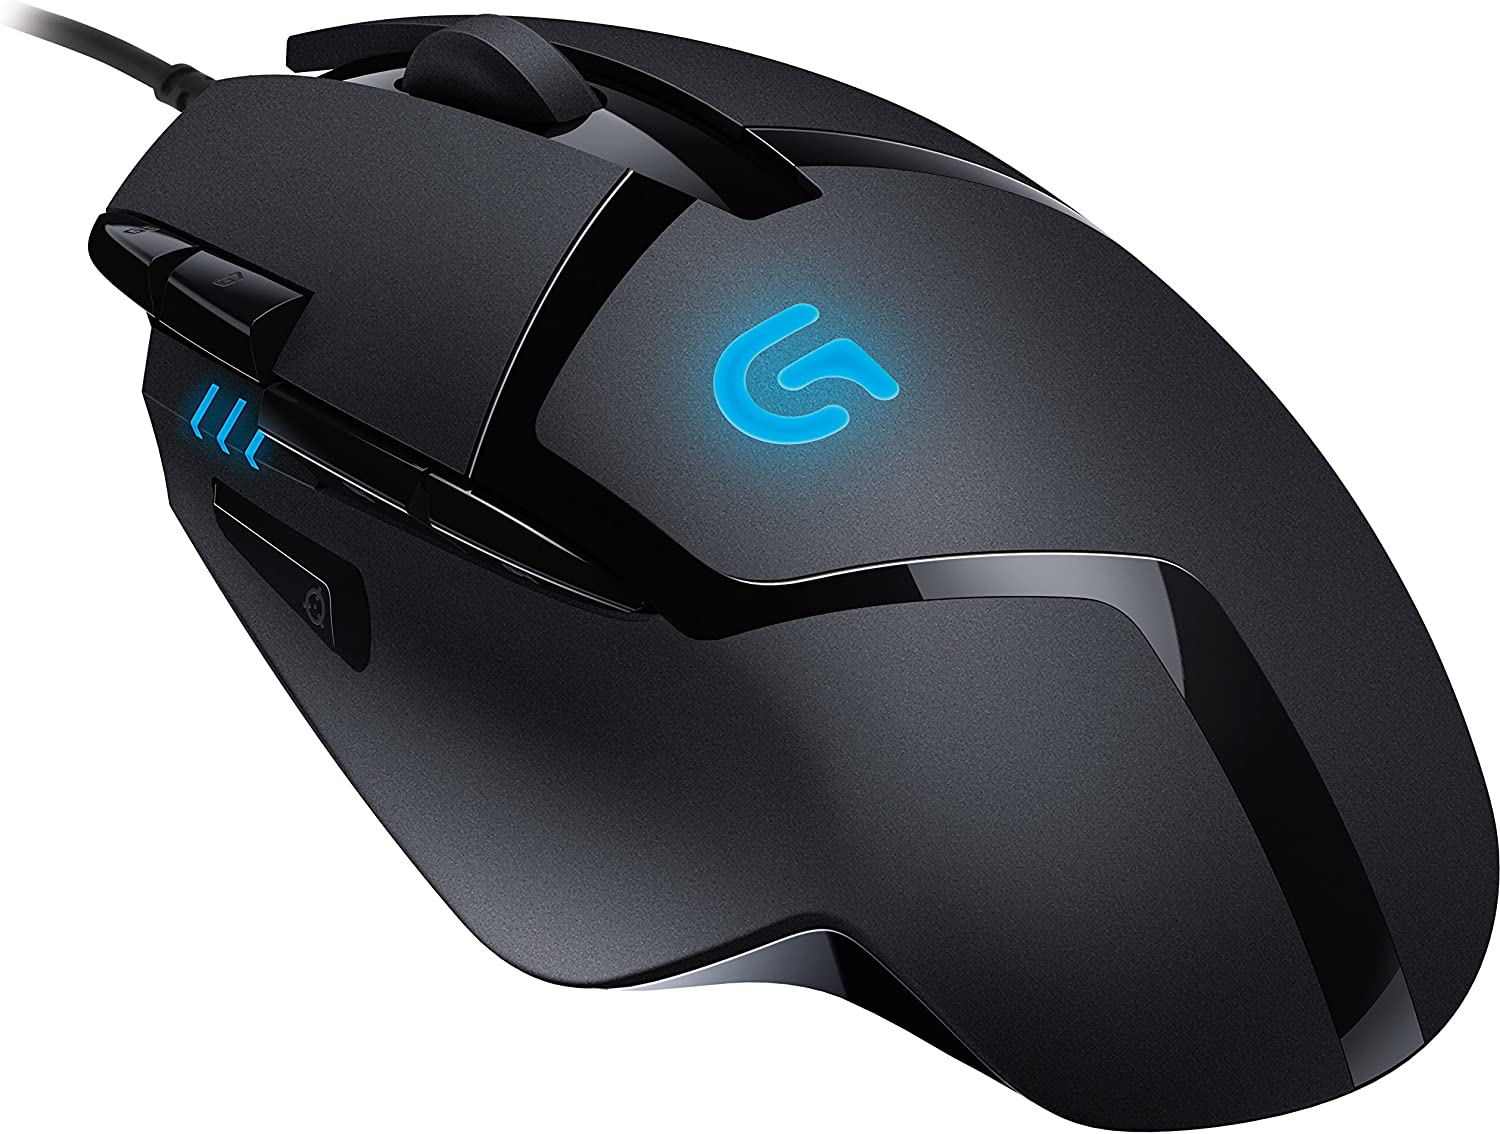 Logitech G402 910-004069 Black Wired Optical Hyperion Fury FPS Gaming Mouse with High Speed Fusion Engine - image 3 of 6